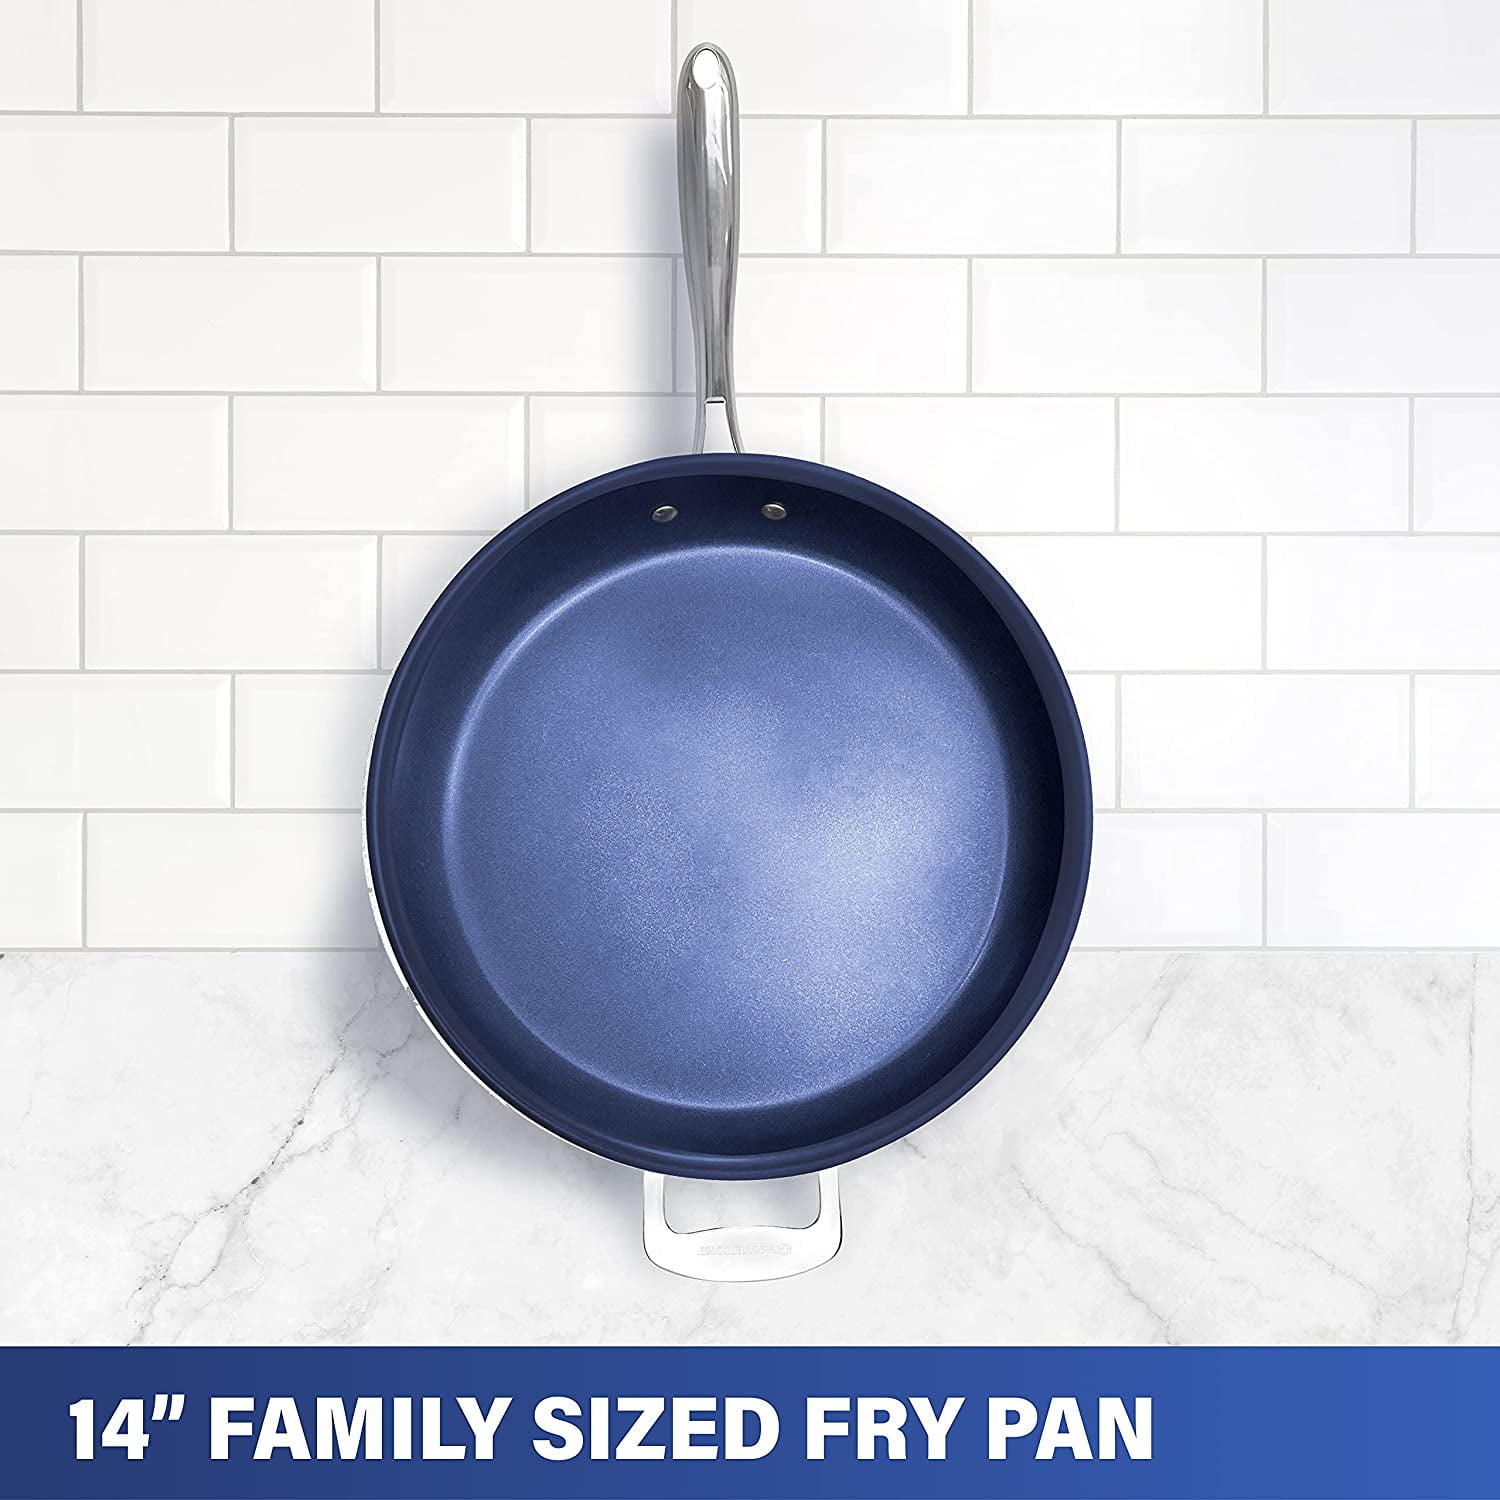 Granite Stone Diamond Granite Stone Classic Blue Nonstick Frying Pan with Ultra Durable Mineral and Diamond Triple Coated Surface Family Sized Open Skillet Oven and Dishwasher Safe 14 